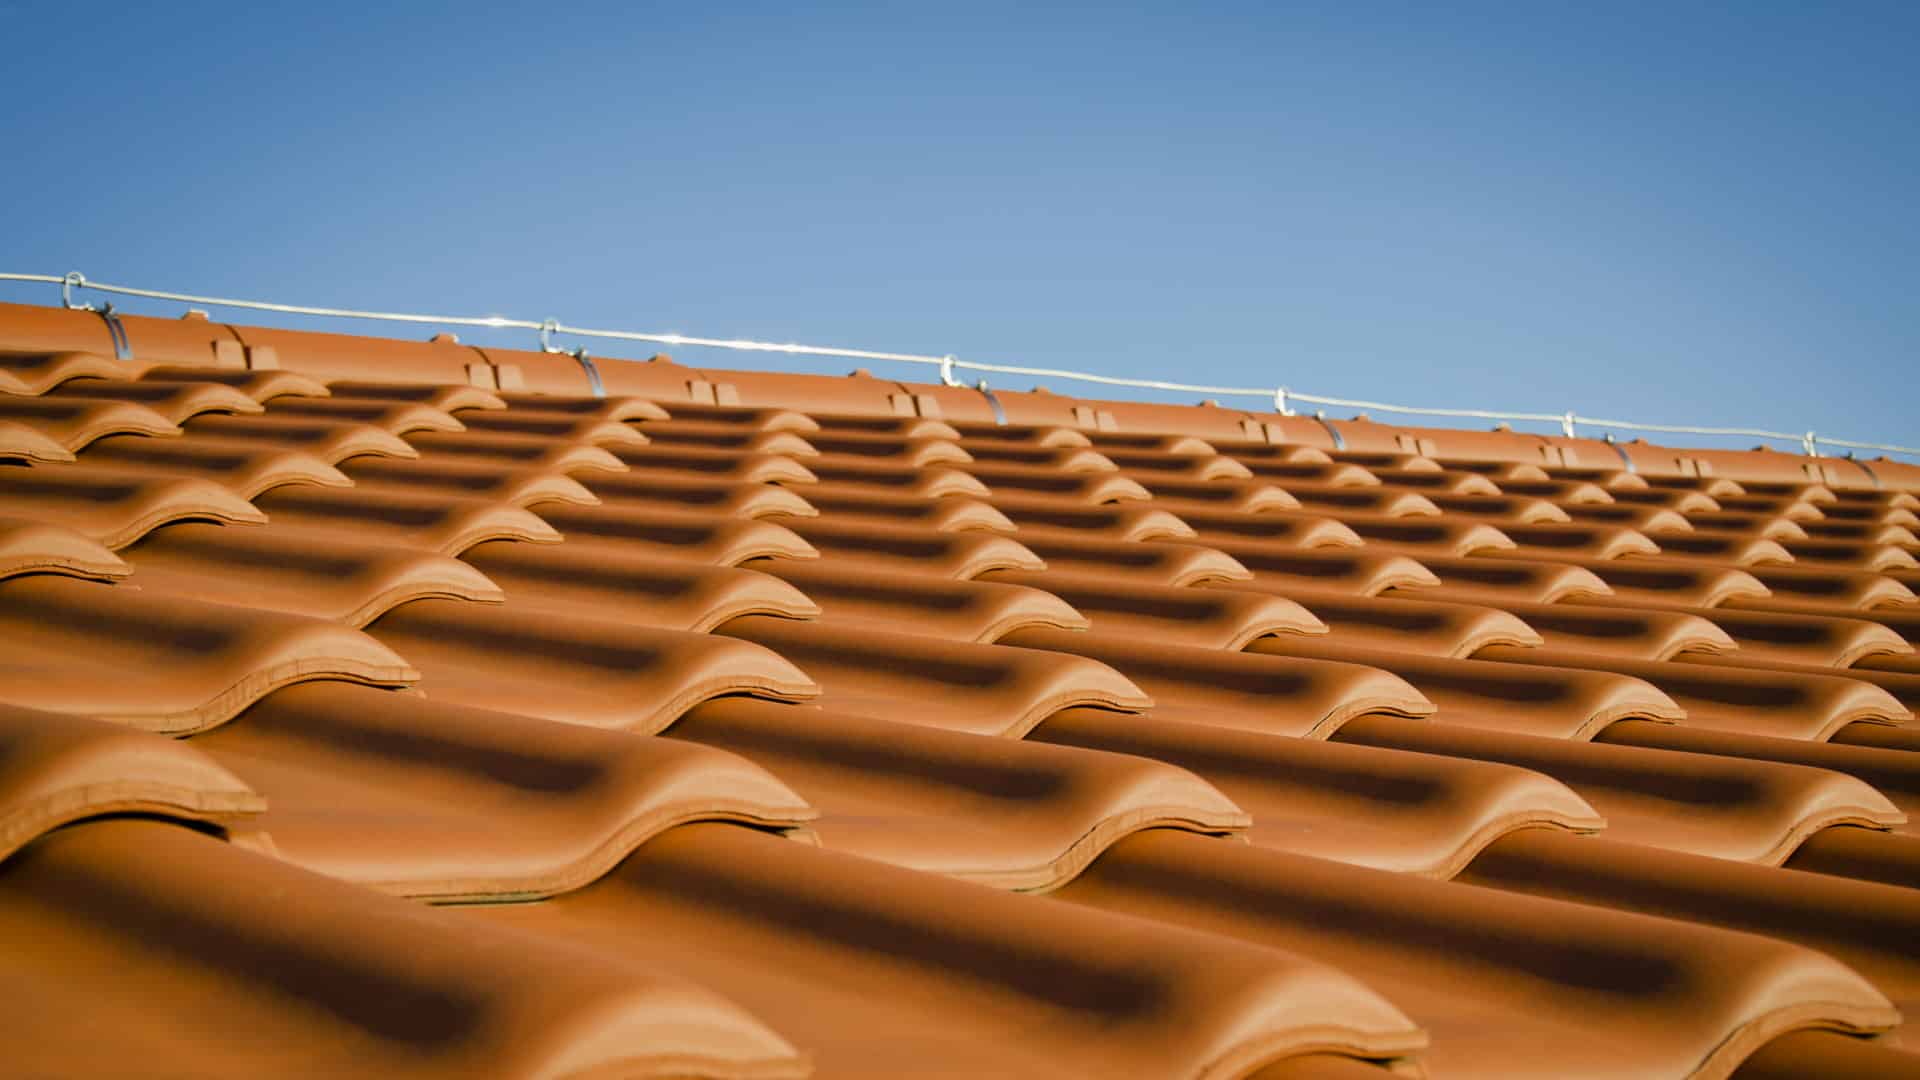 Close up of orange roofing tiles